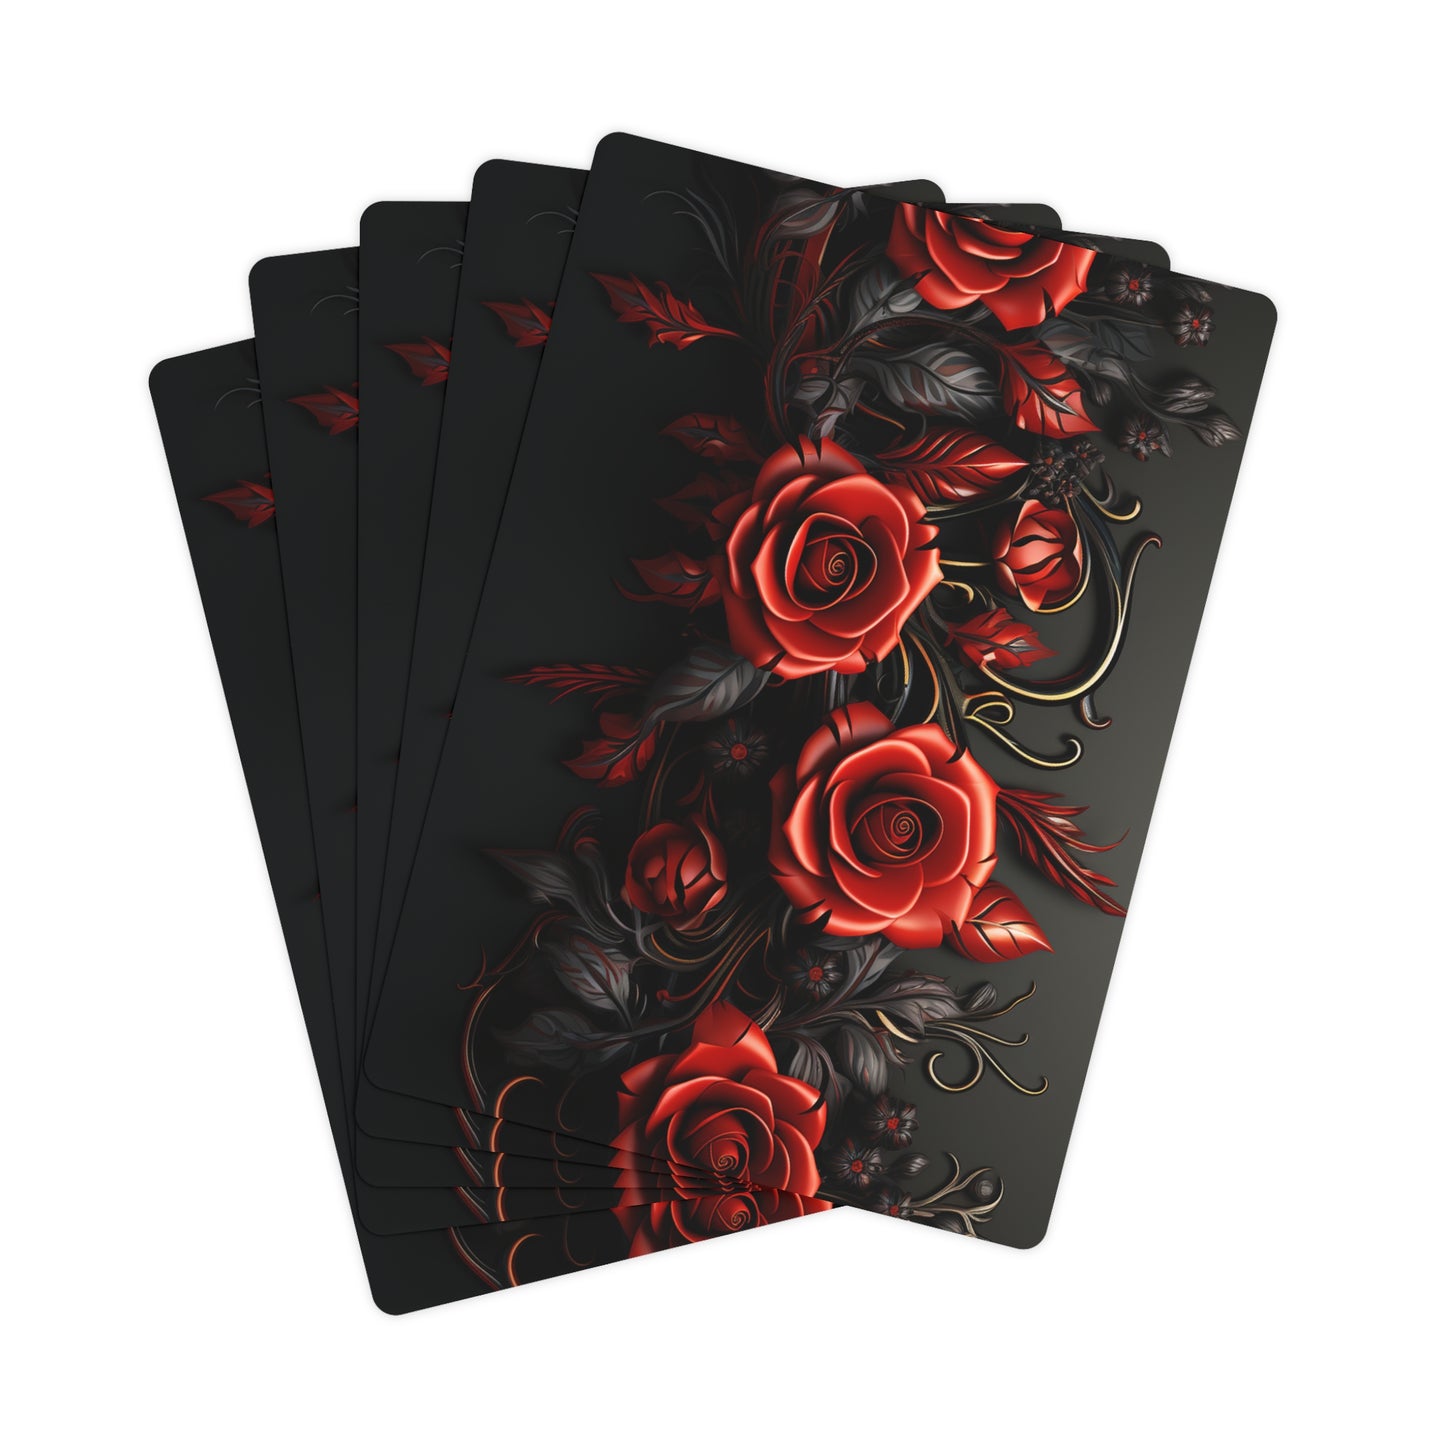 Neduz Designs Gothic Poker Cards - Artificial Gothic Roses Print, Durable UV-Coated